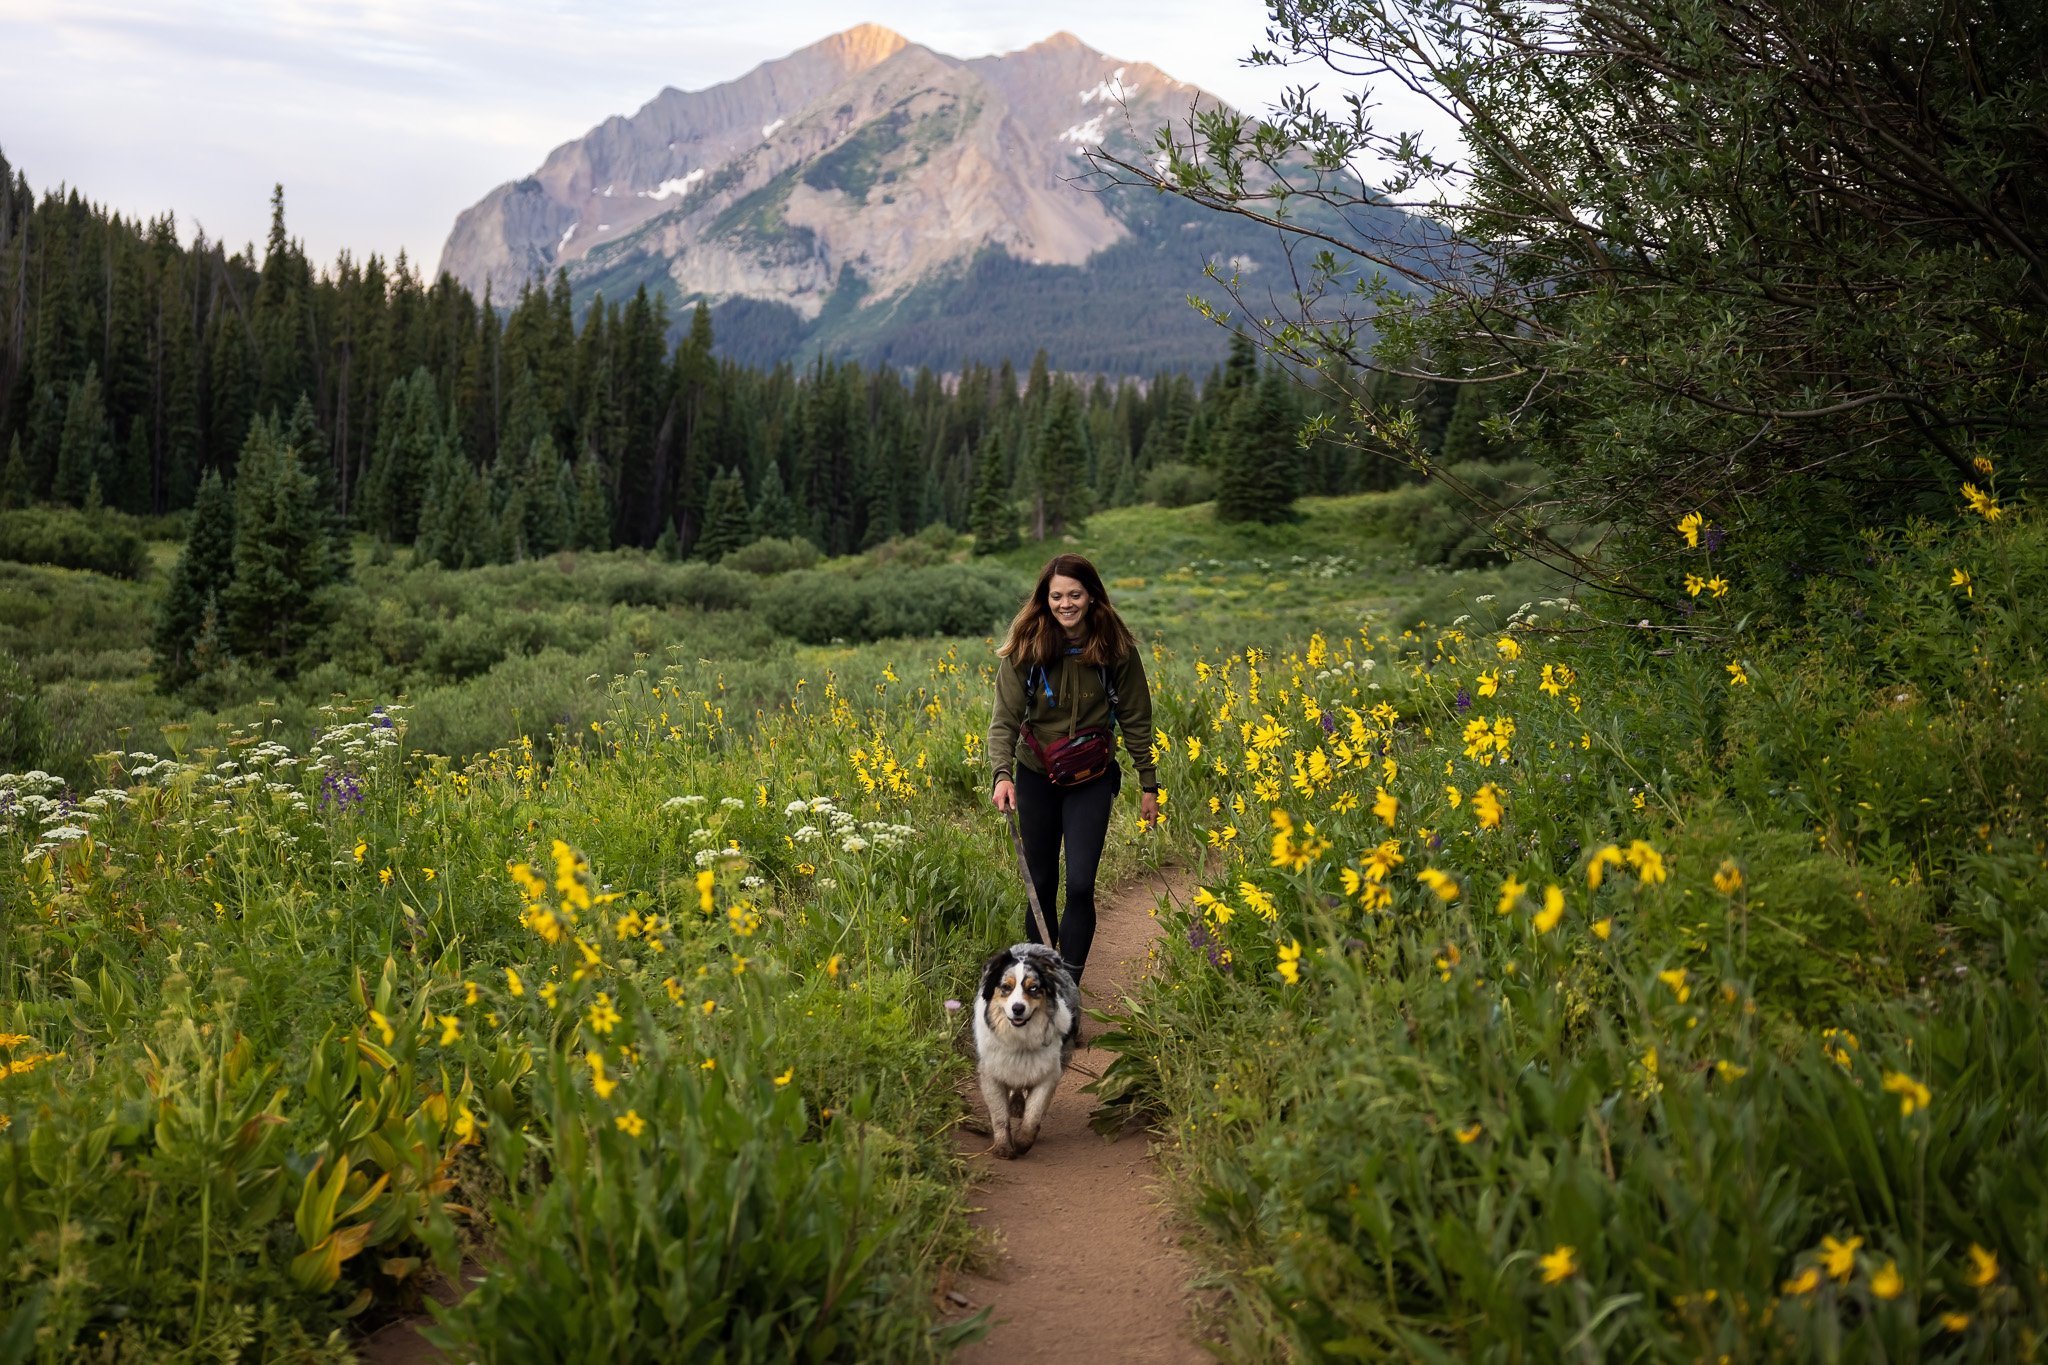 Hiking_with_dogs_Crested_Butte_wildflowers_015.jpg